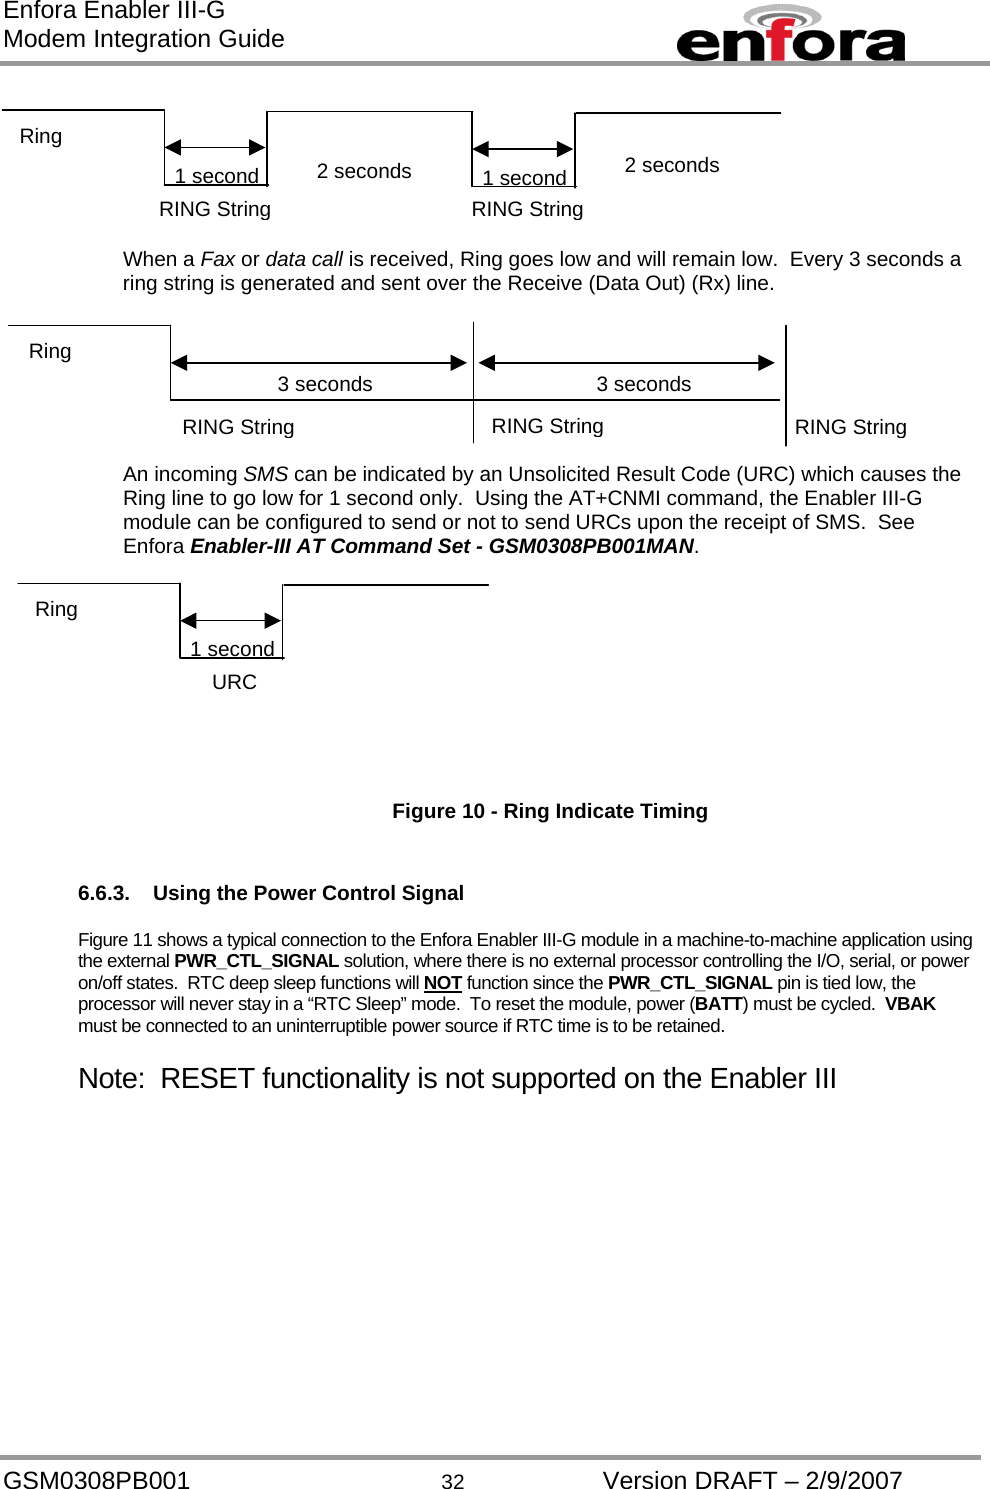 Enfora Enabler III-G Modem Integration Guide        When a Fax or data call is received, Ring goes low and will remain low.  Every 3 seconds a ring string is generated and sent over the Receive (Data Out) (Rx) line.        An incoming SMS can be indicated by an Unsolicited Result Code (URC) which causes the Ring line to go low for 1 second only.  Using the AT+CNMI command, the Enabler III-G module can be configured to send or not to send URCs upon the receipt of SMS.  See Enfora Enabler-III AT Command Set - GSM0308PB001MAN.     1 second  2 seconds 1 second 2 secondsRING String RING StringRing 3 secondsRING String RING StringRing 3 secondsRING String  1 second URC Ring    Figure 10 - Ring Indicate Timing   6.6.3.  Using the Power Control Signal  Figure 11 shows a typical connection to the Enfora Enabler III-G module in a machine-to-machine application using the external PWR_CTL_SIGNAL solution, where there is no external processor controlling the I/O, serial, or power on/off states.  RTC deep sleep functions will NOT function since the PWR_CTL_SIGNAL pin is tied low, the processor will never stay in a “RTC Sleep” mode.  To reset the module, power (BATT) must be cycled.  VBAK must be connected to an uninterruptible power source if RTC time is to be retained. Note:  RESET functionality is not supported on the Enabler III GSM0308PB001  32  Version DRAFT – 2/9/2007 